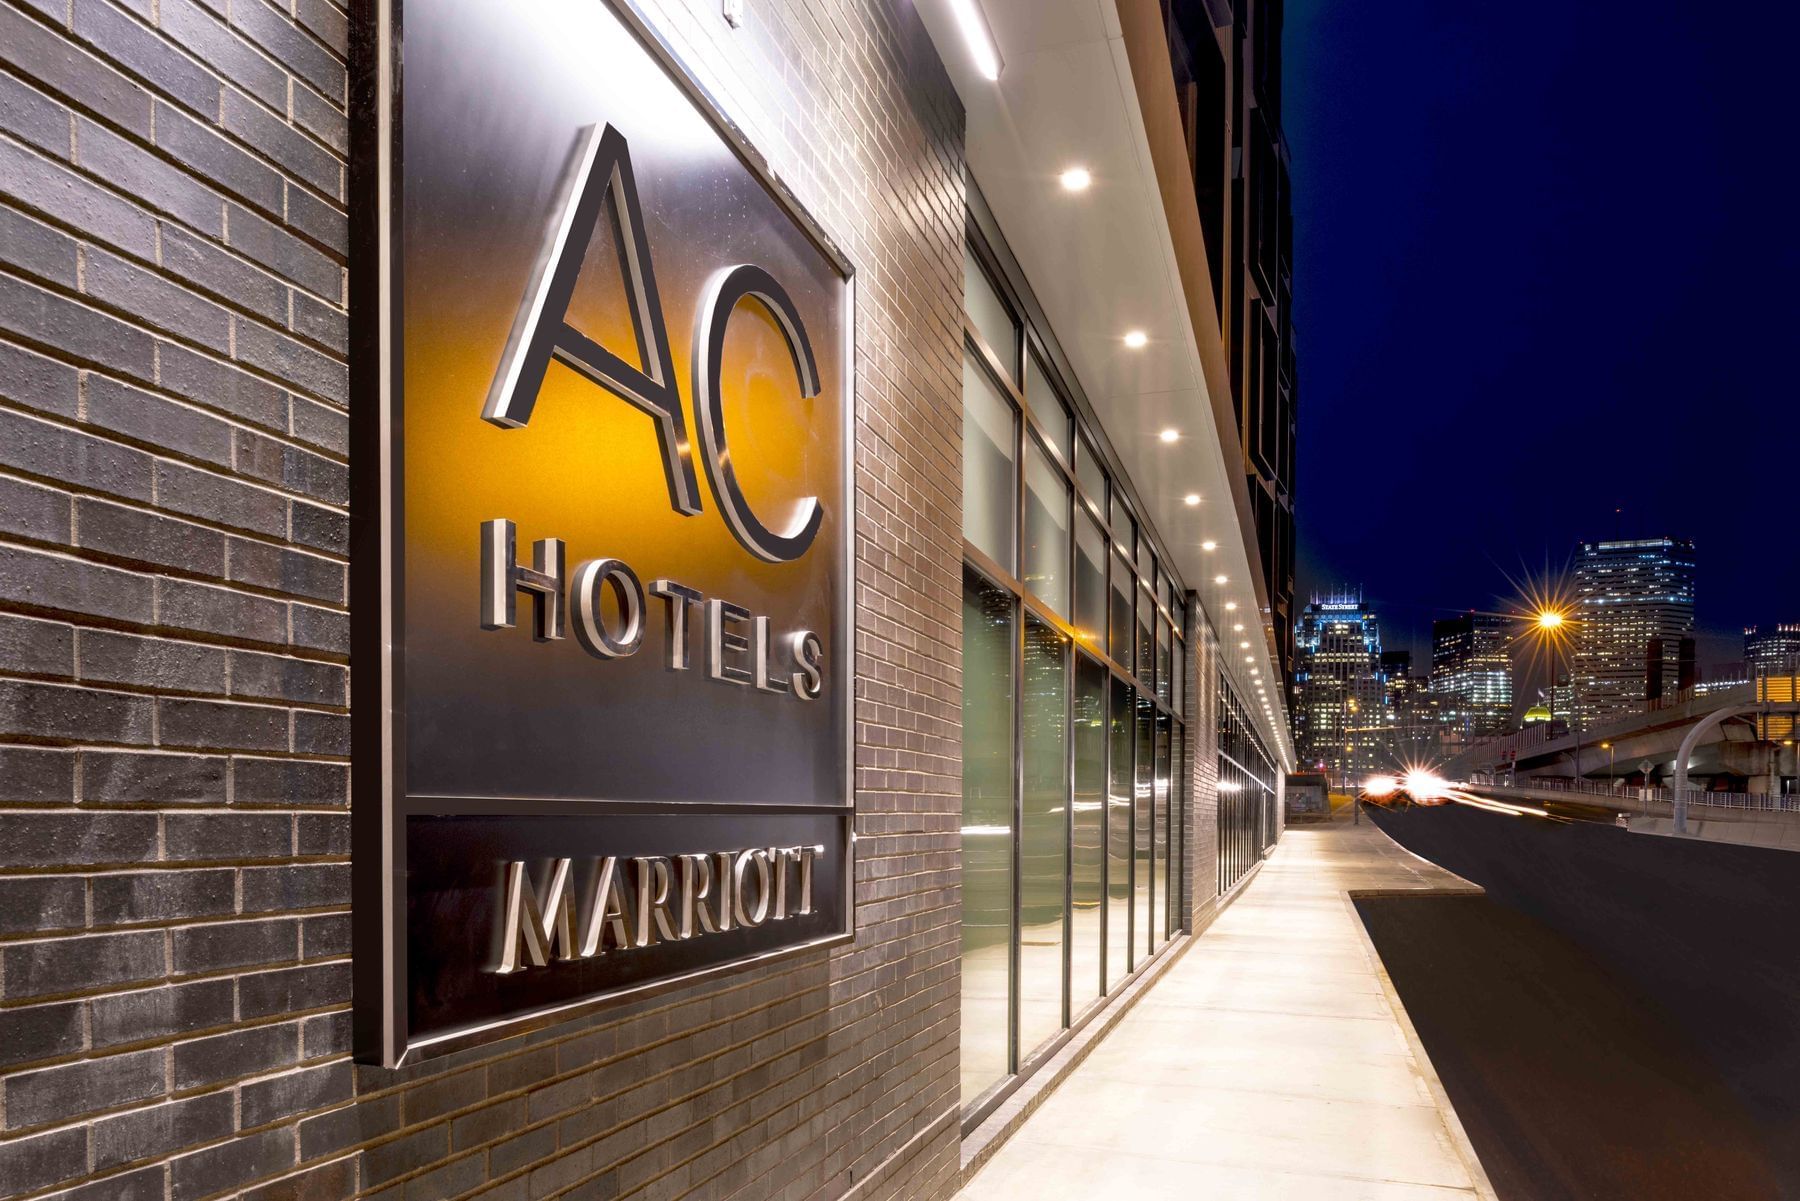 Exterior AC Hotels by Marriott sign